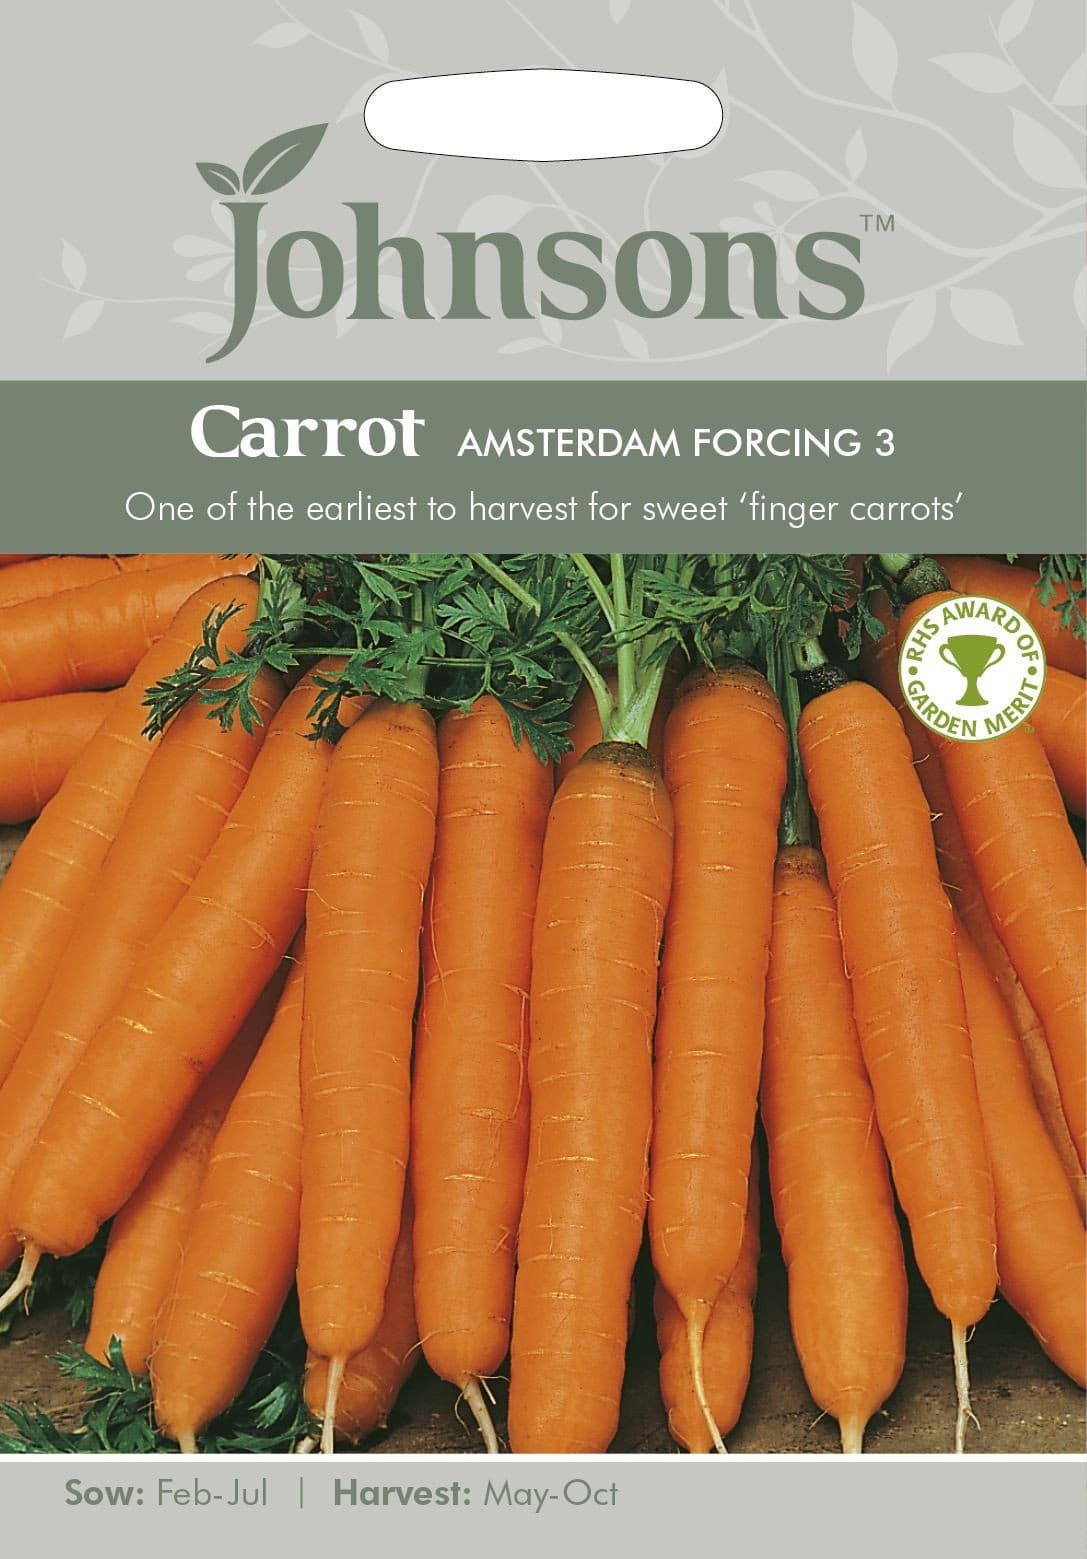 Johnsons Carrot Amsterdam forcing 3 2000 Seeds